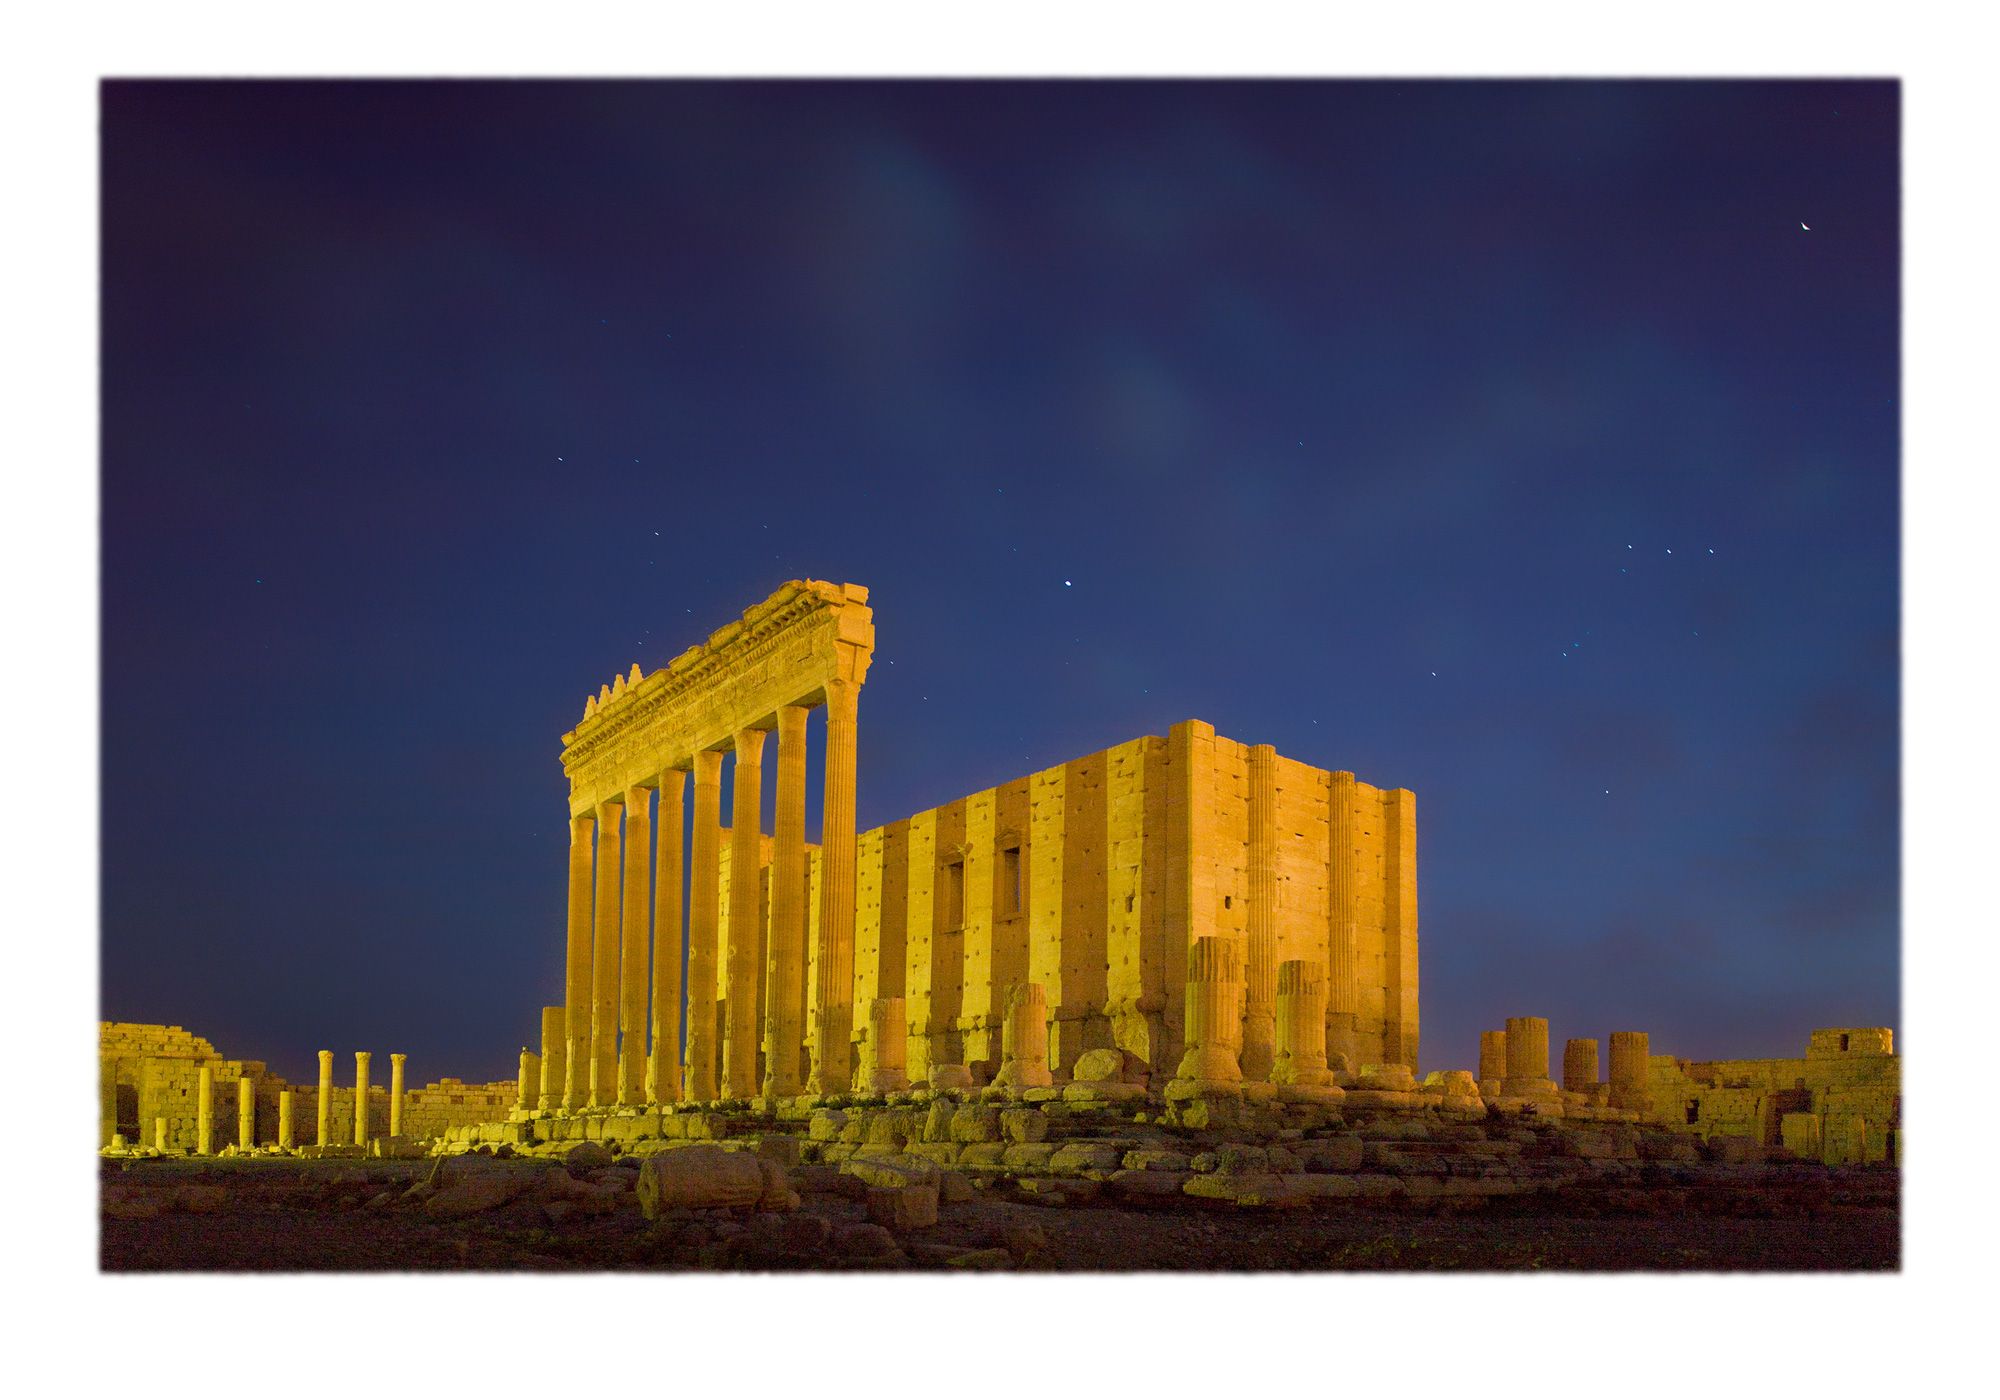 Nightime view of the constellation Orion and the lost archaeological ruins of the monumental pagan Temple of Baal in the classical style. The raised Naos in the proximate center of the elevated tememos was consecrated  in 32 CE to the Semitic deity Baal who was assimilated with the Mesopotamian god Bel-Marduk, both of whom presided over the movement of the stars.  Palmyra aka Tadmur, Syria.